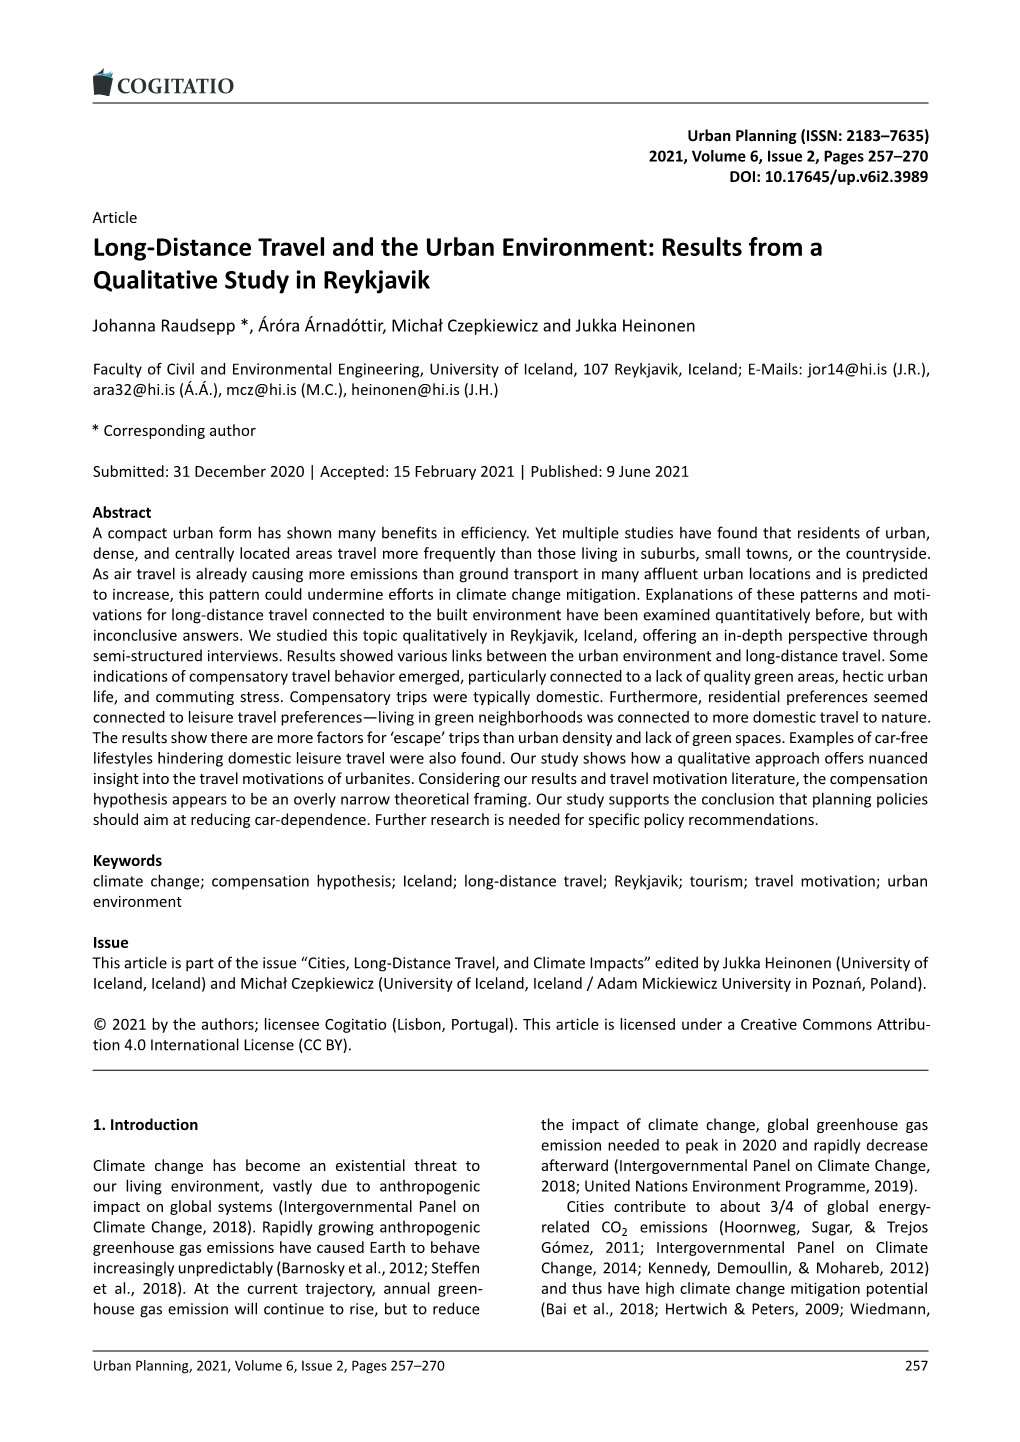 Long-Distance Travel and the Urban Environment: Results from A